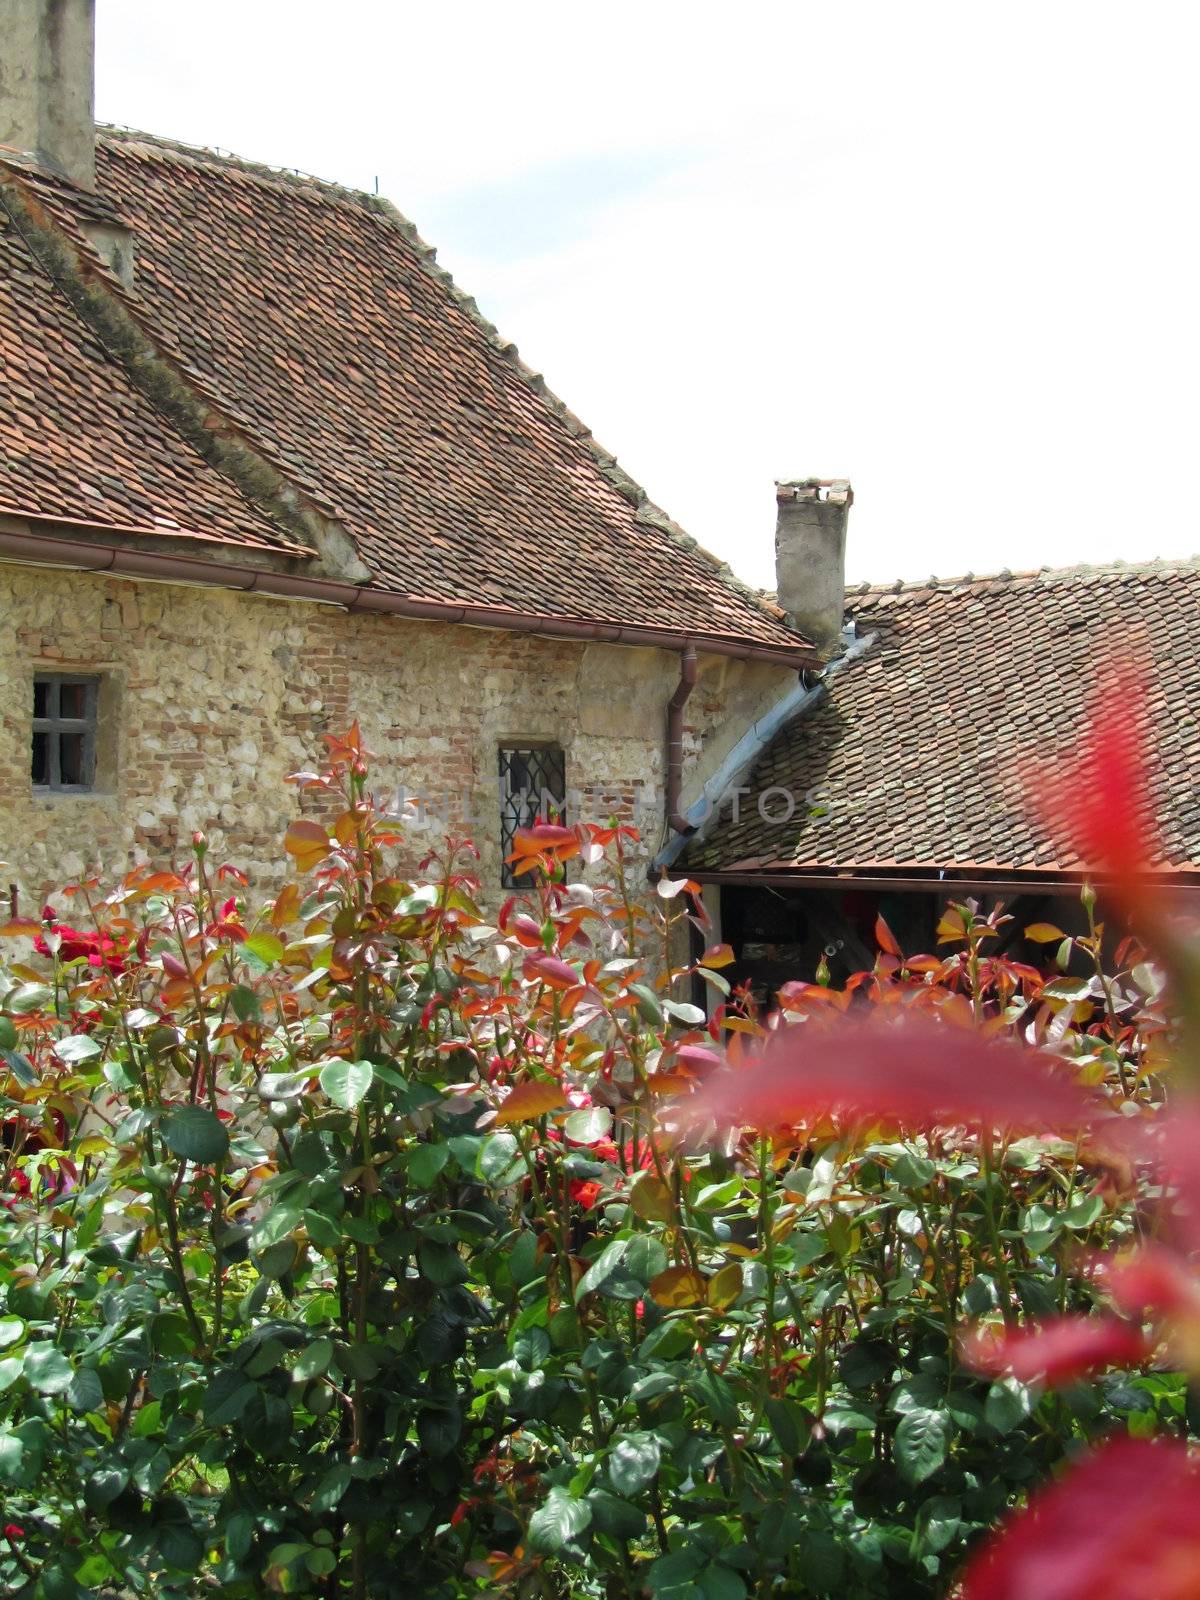 Hedges in a medieval village with red leaves and country houses